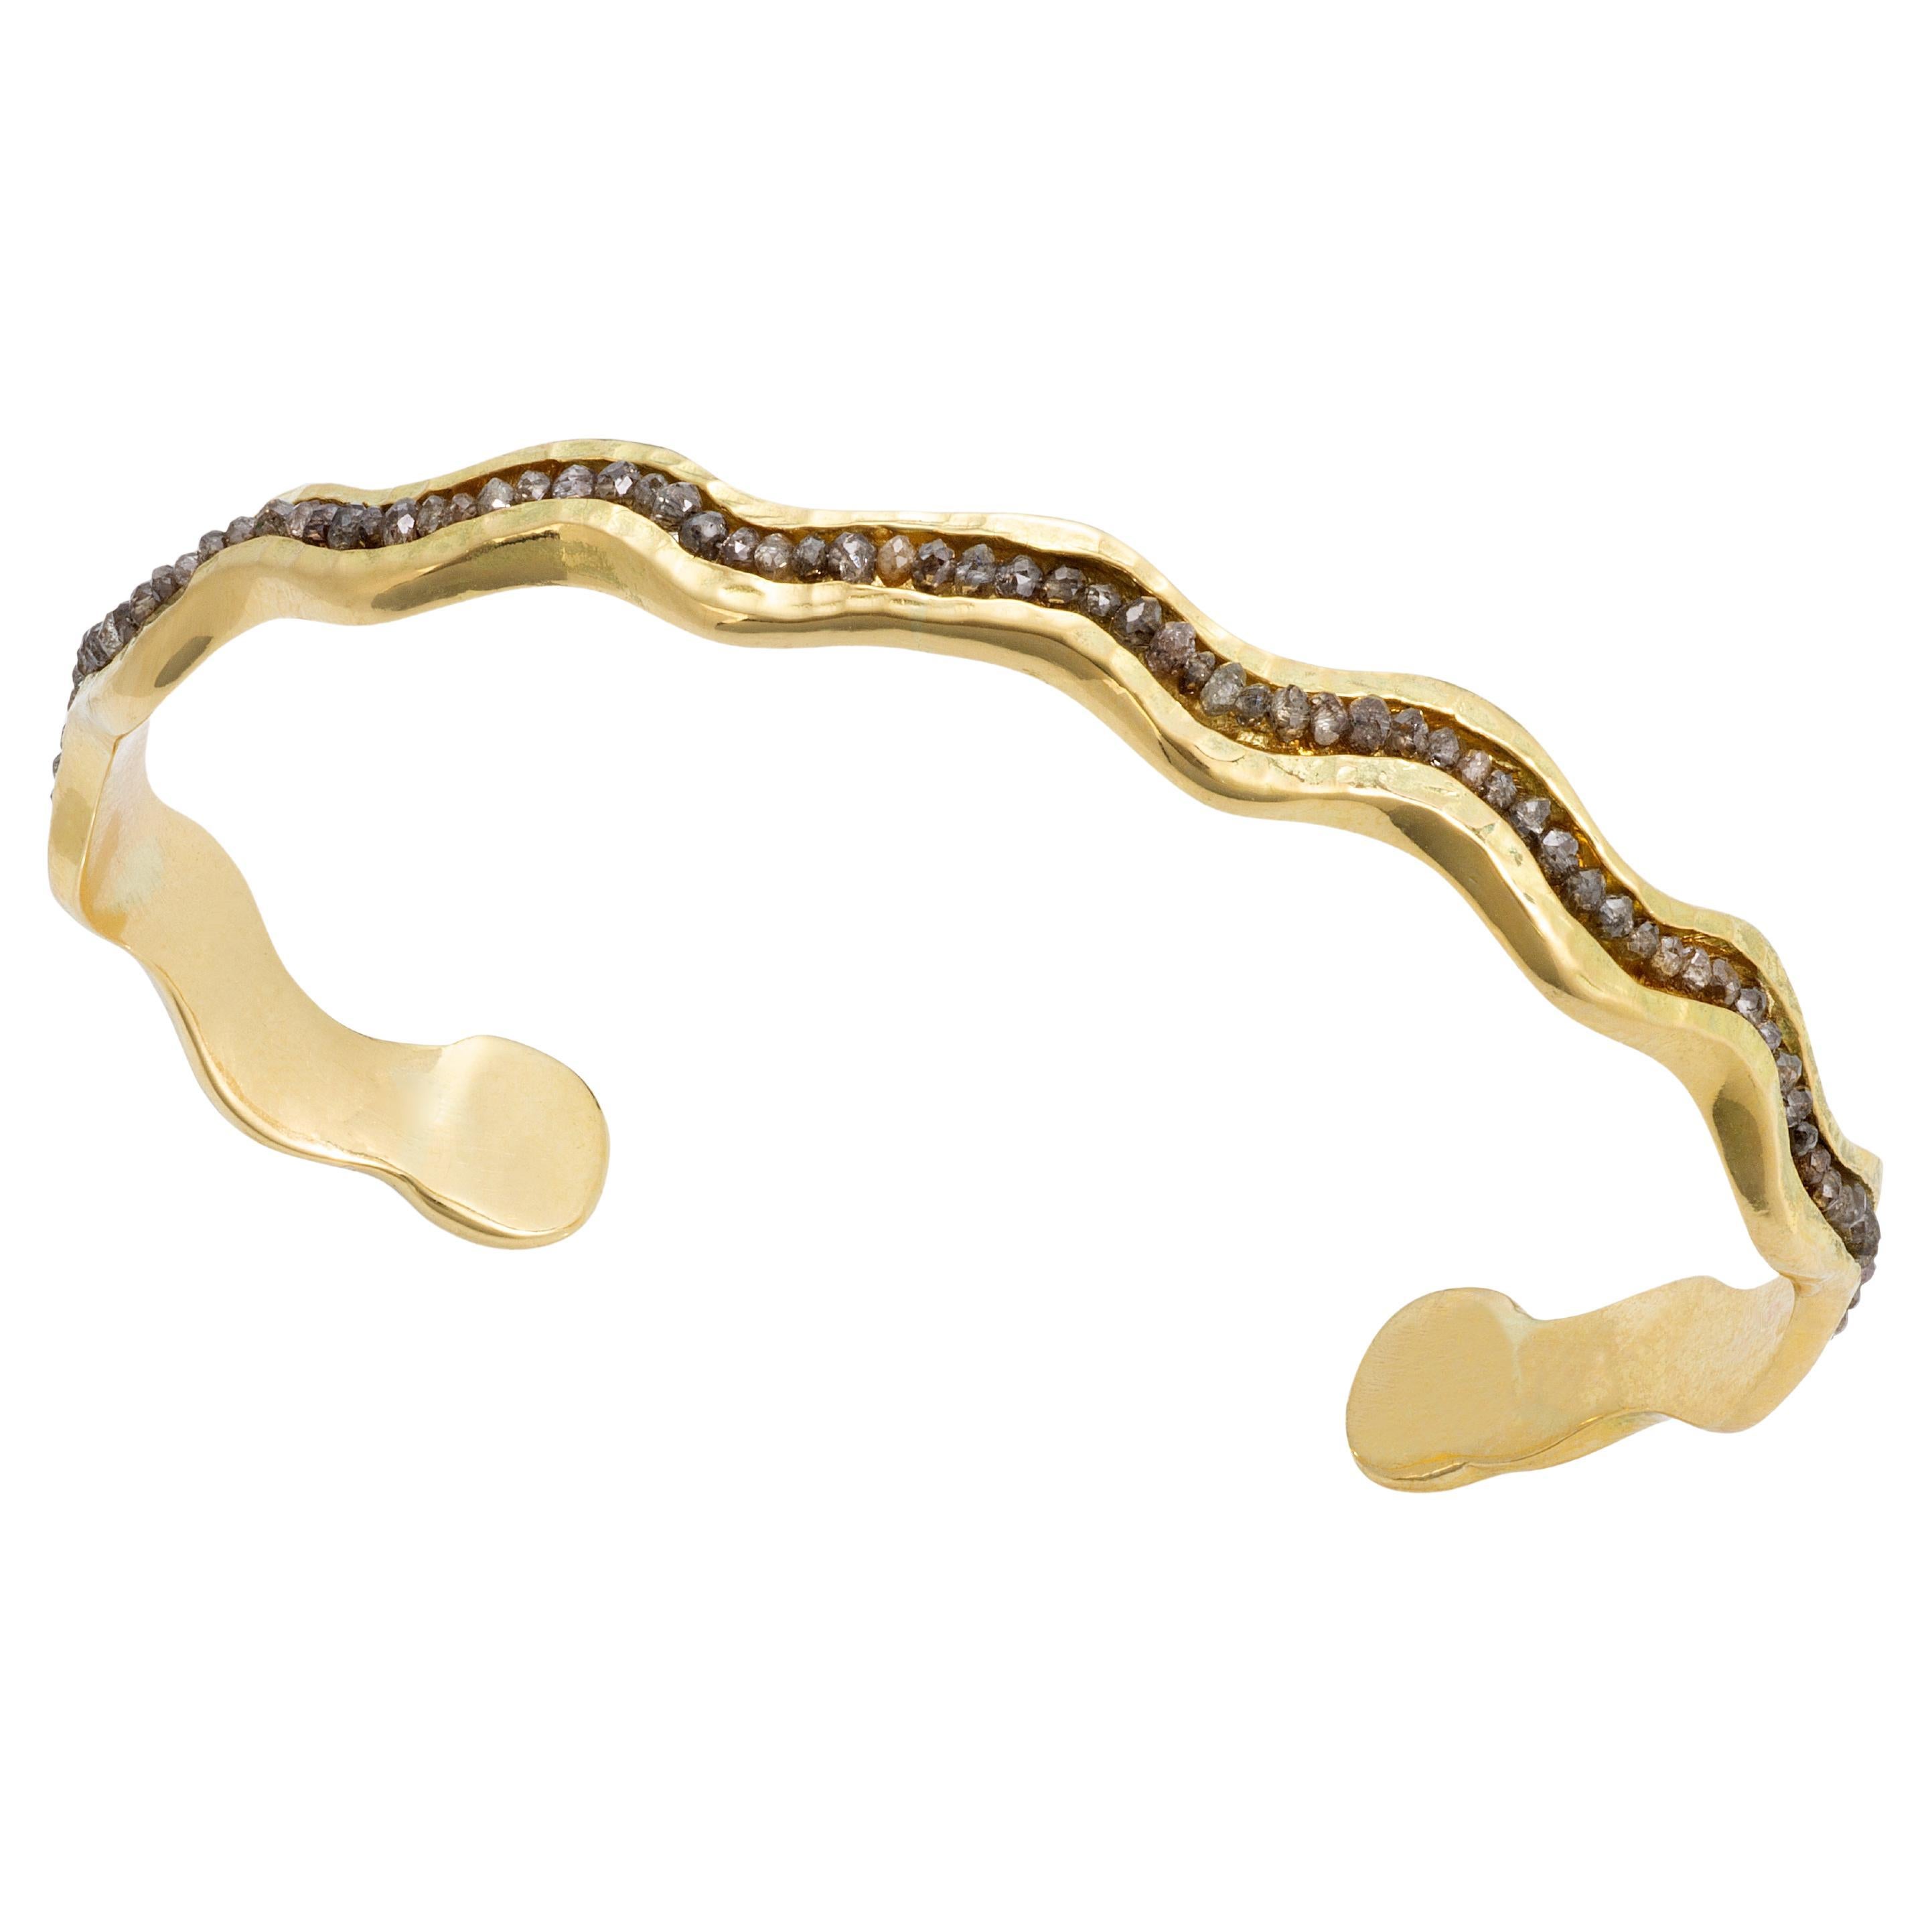 18K Yellow gold undulating Wave cuff with Brown faceted cut Diamonds is part of my Wave collection of cuffs and rings. The warmth of the rich yellow 18K gold pairs well with the mink colored brown diamond beads, all hand set. 